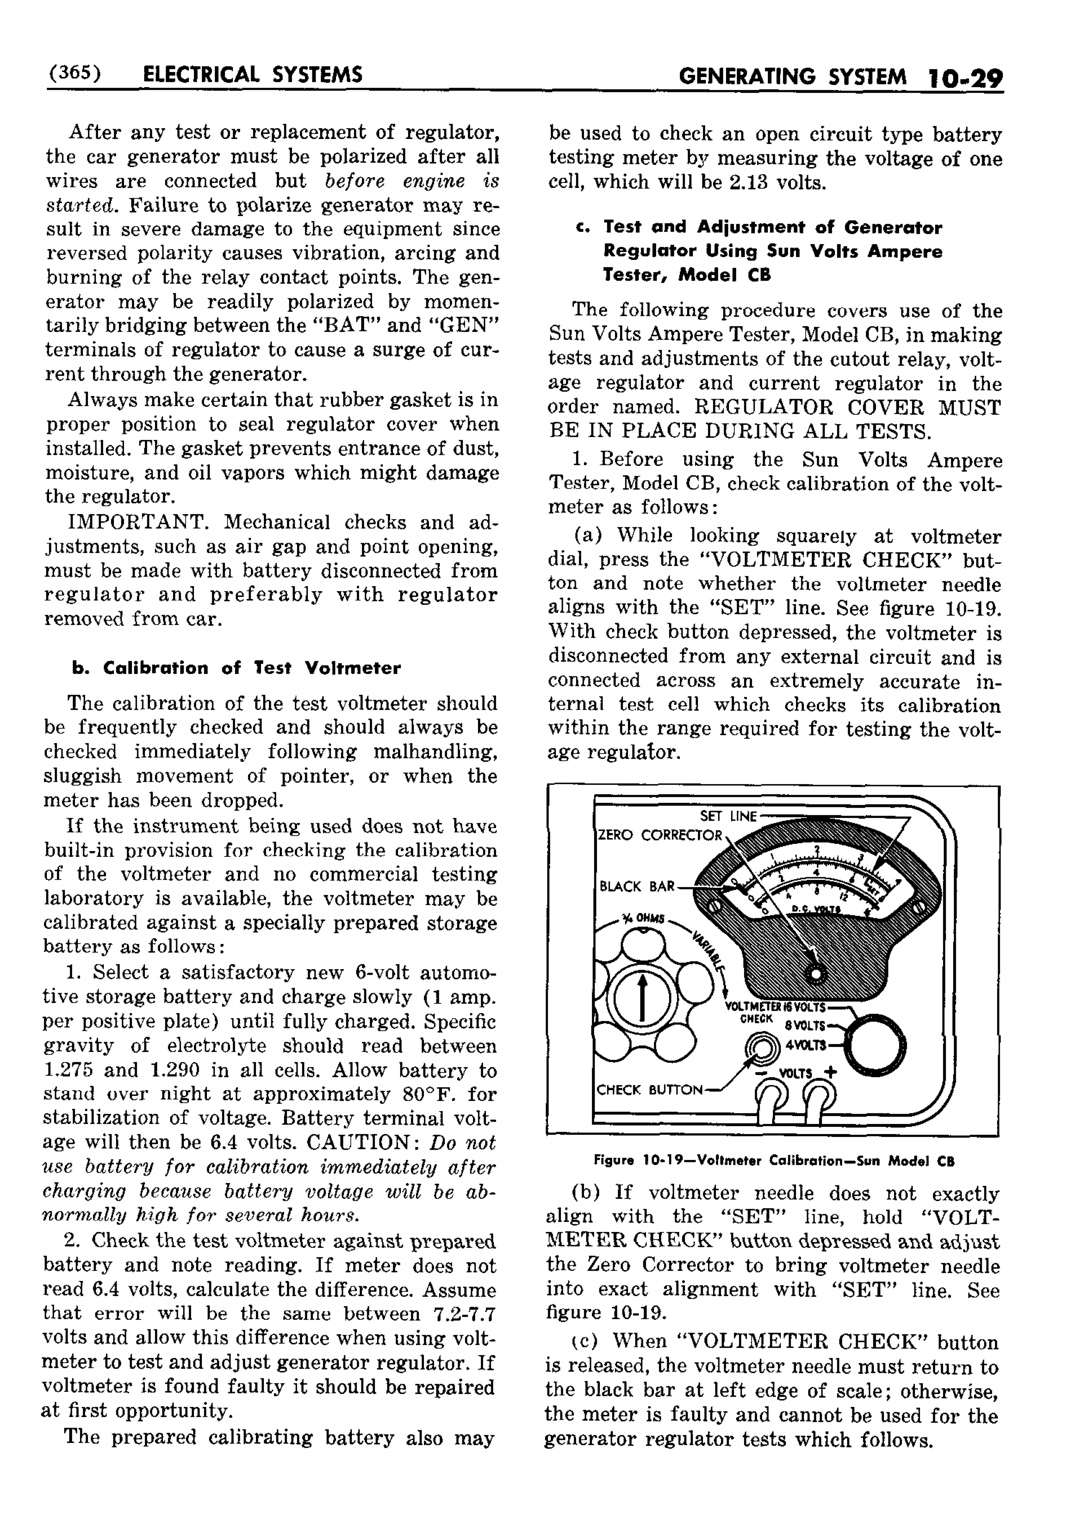 n_11 1952 Buick Shop Manual - Electrical Systems-029-029.jpg